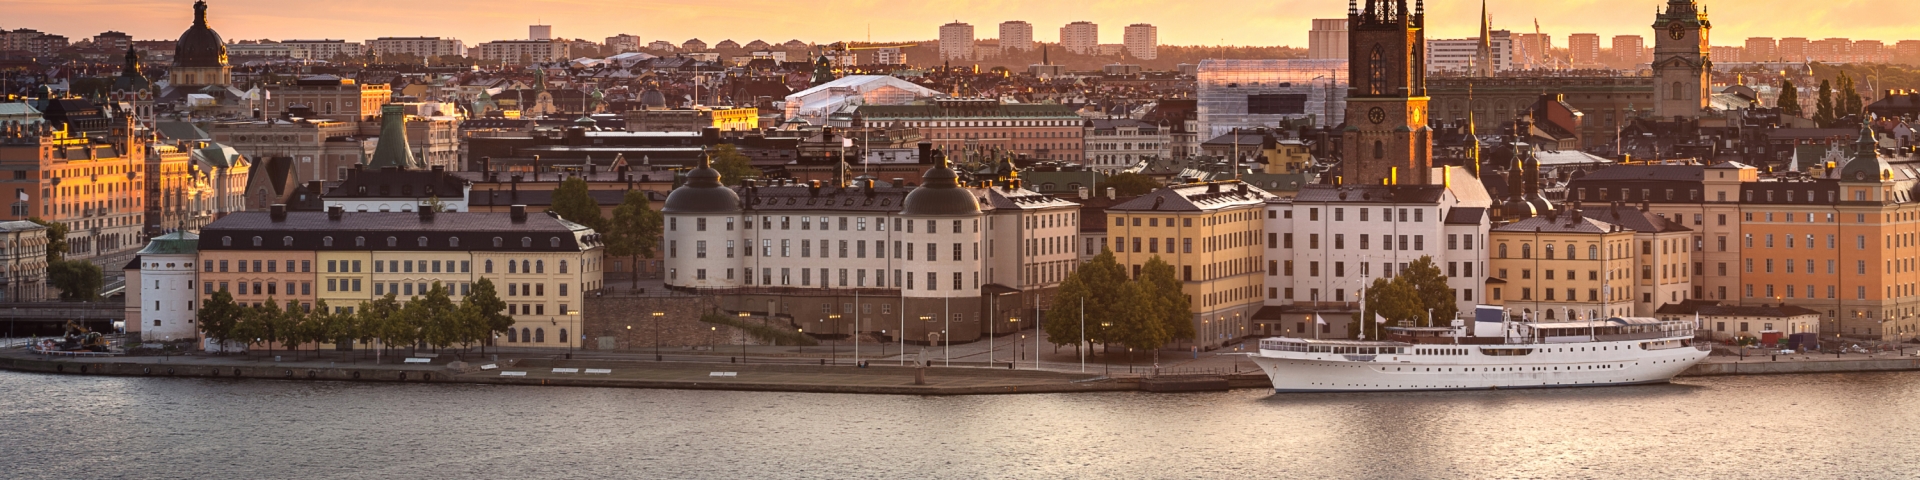 KPS Sweden Announces Inauguration of New Office in Stockholm